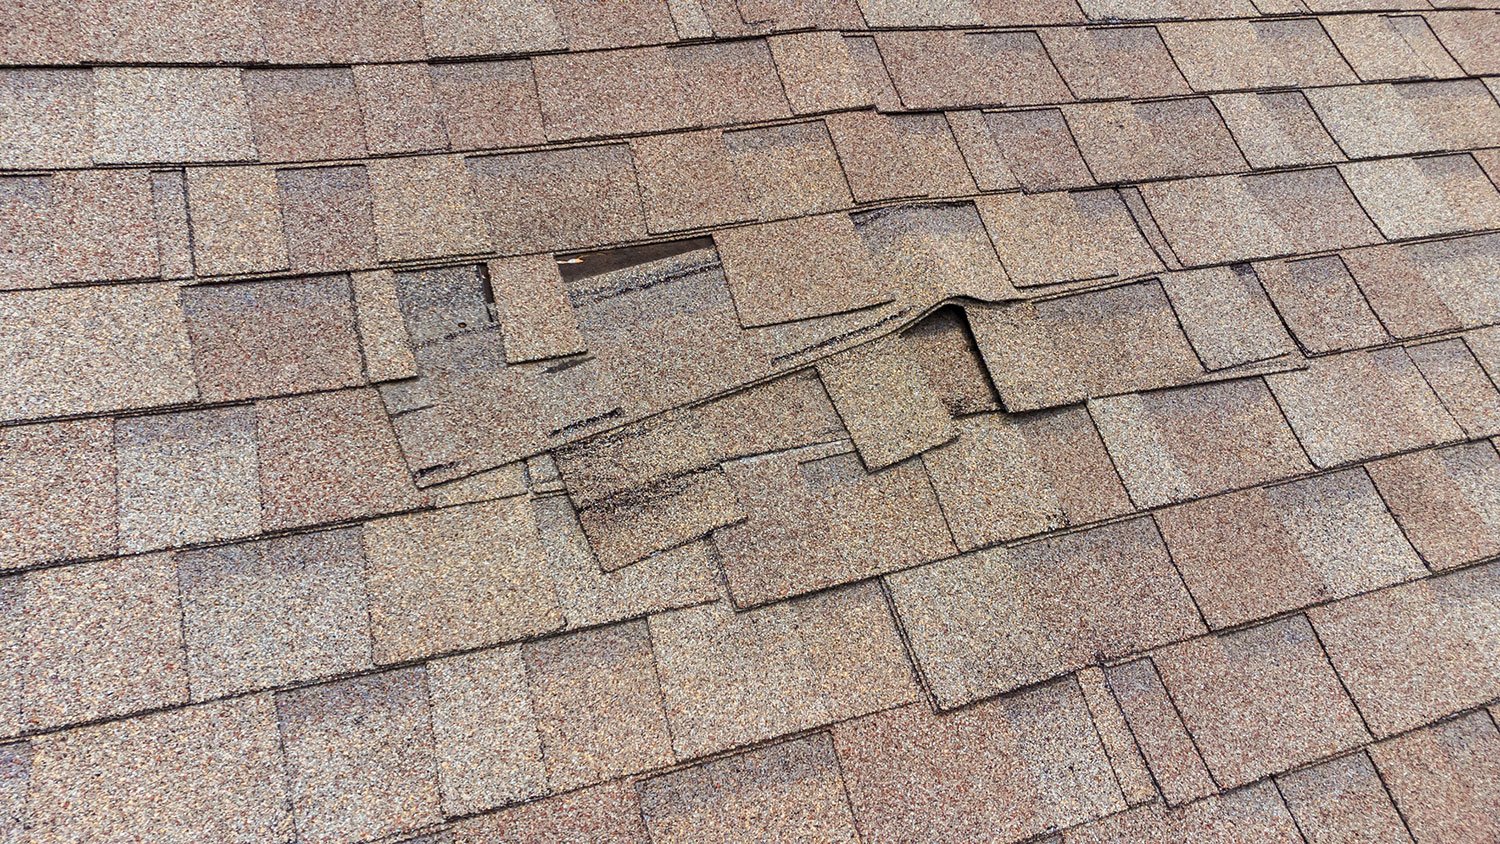 don't buy a house with these shingles